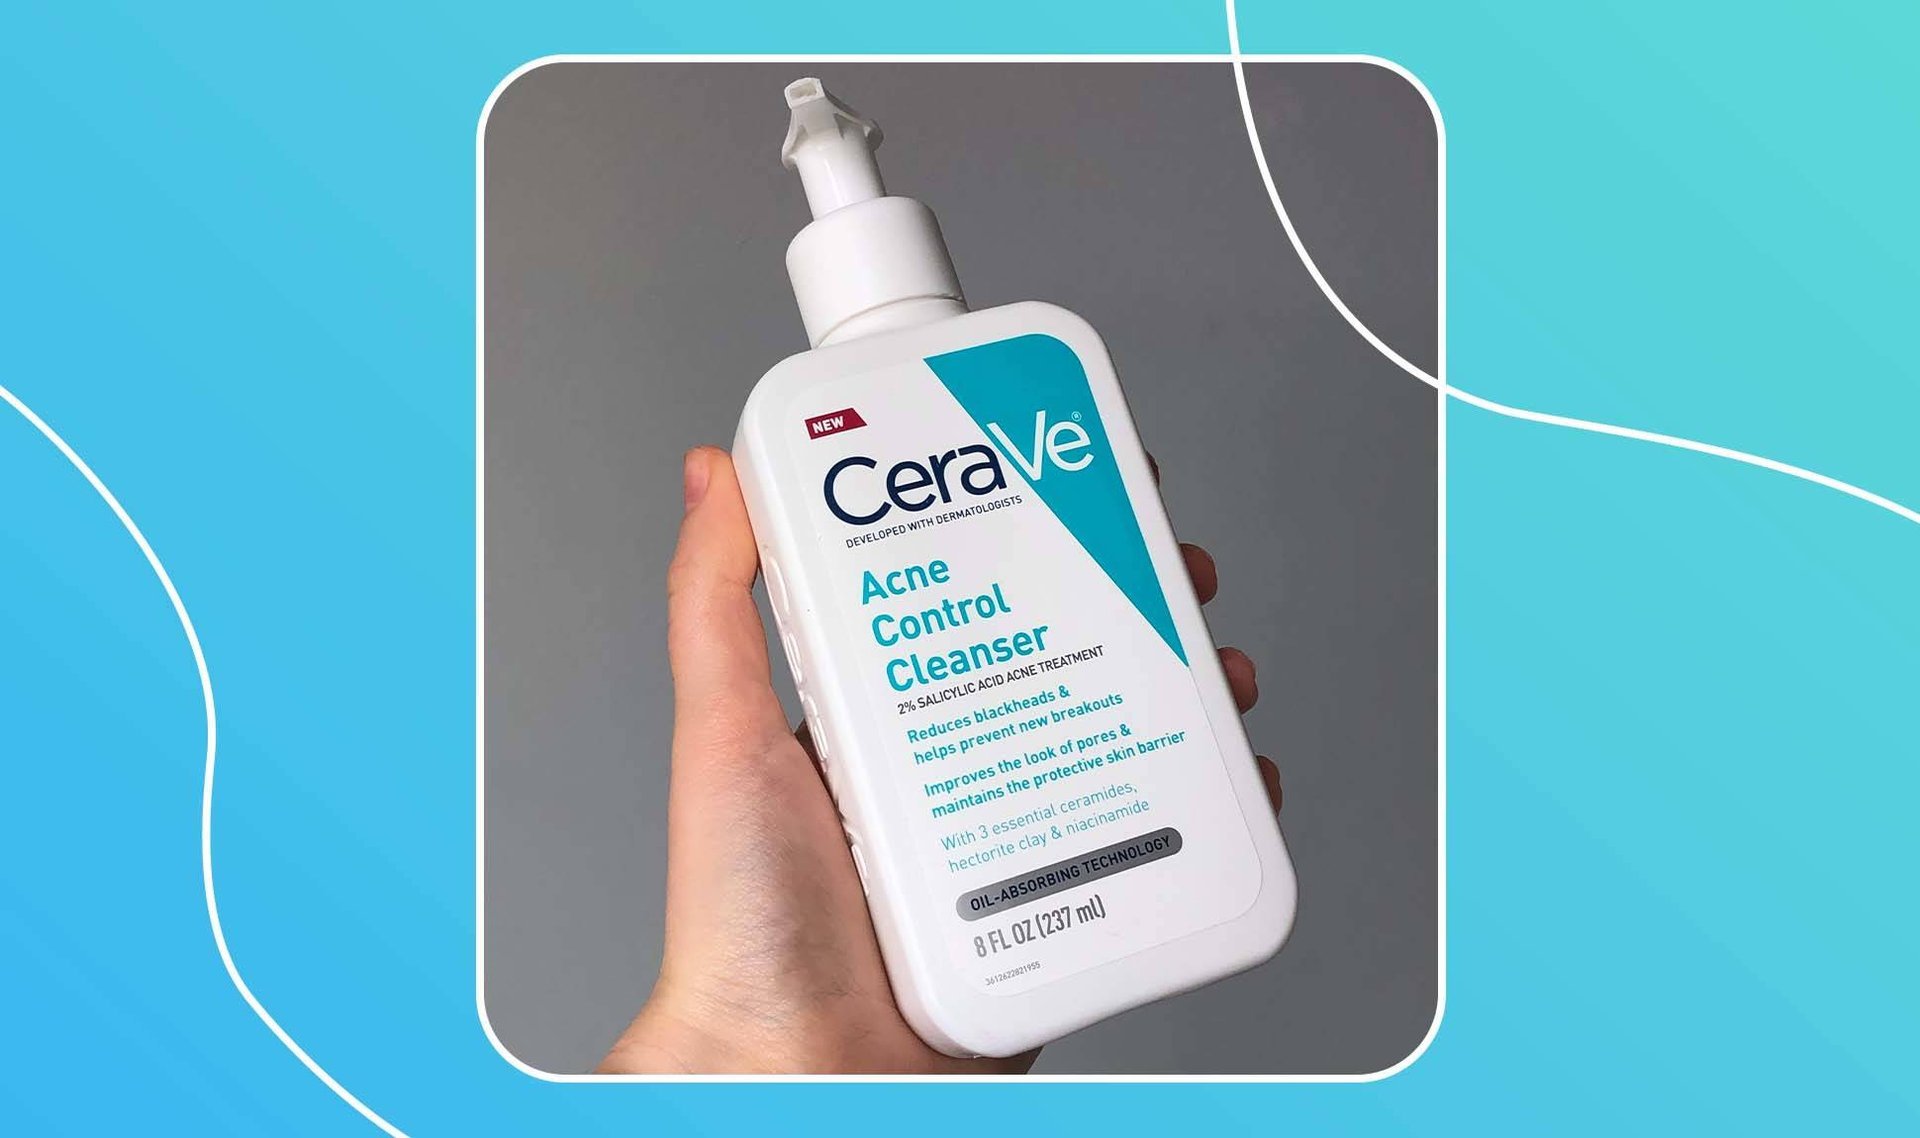 https://www.skincare.com/-/media/project/loreal/brand-sites/sdc/americas/us/articles/2022/04_april/06-cerave-acne-cleanser-review/cerave-acne-control-cleanser-hero_970x575-sdc-032322.jpg